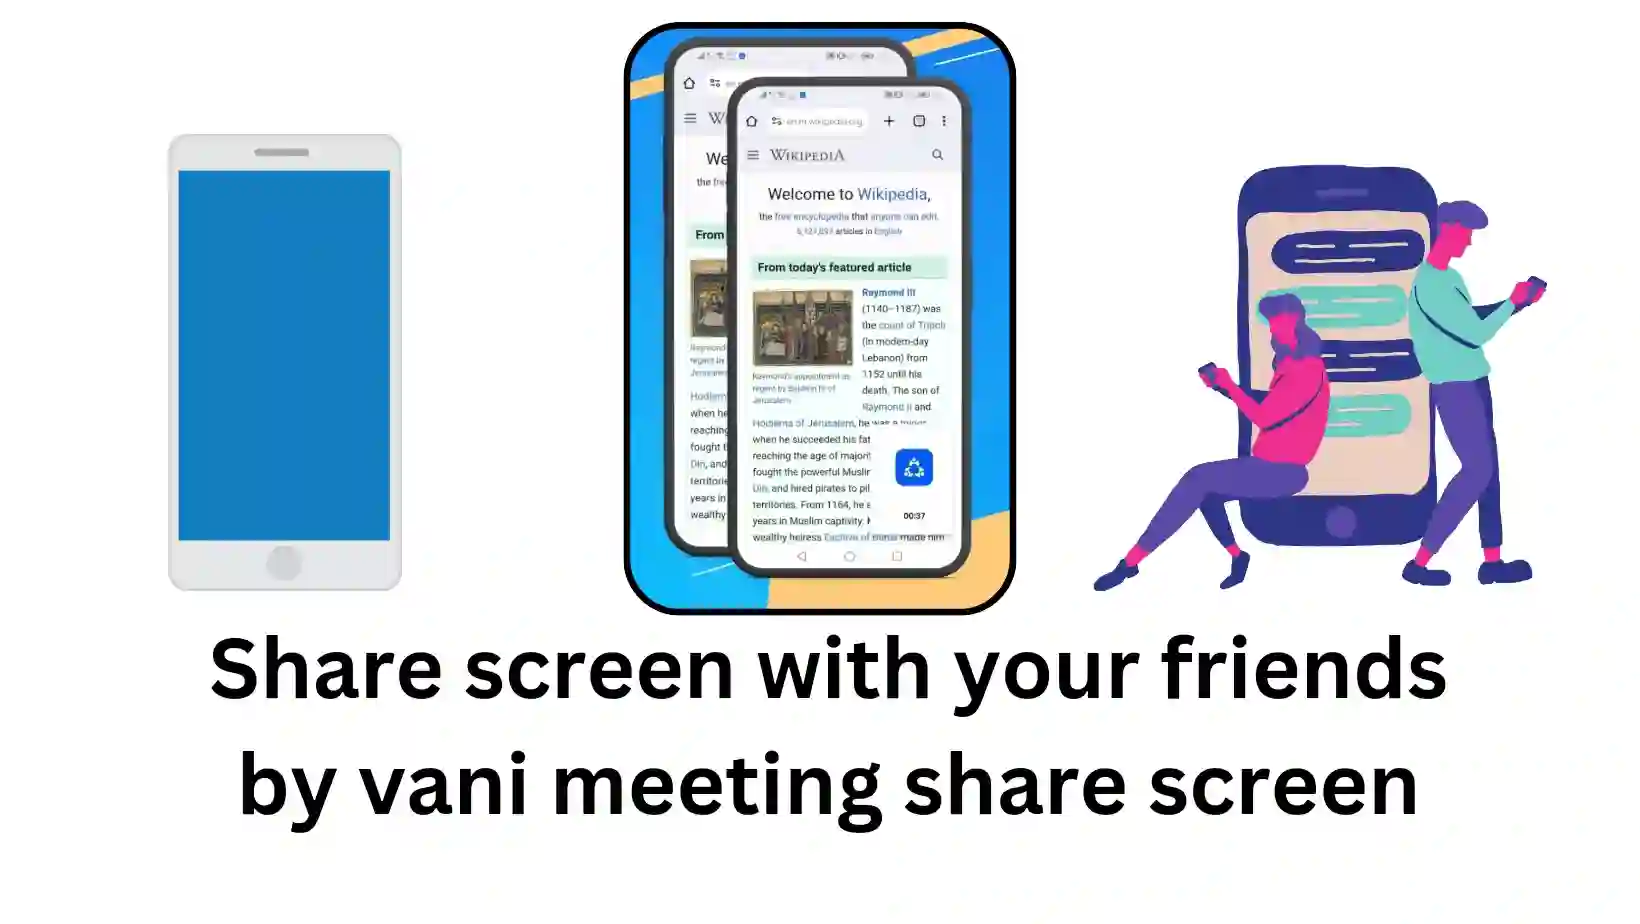 Share screen with your friends by vani meeting